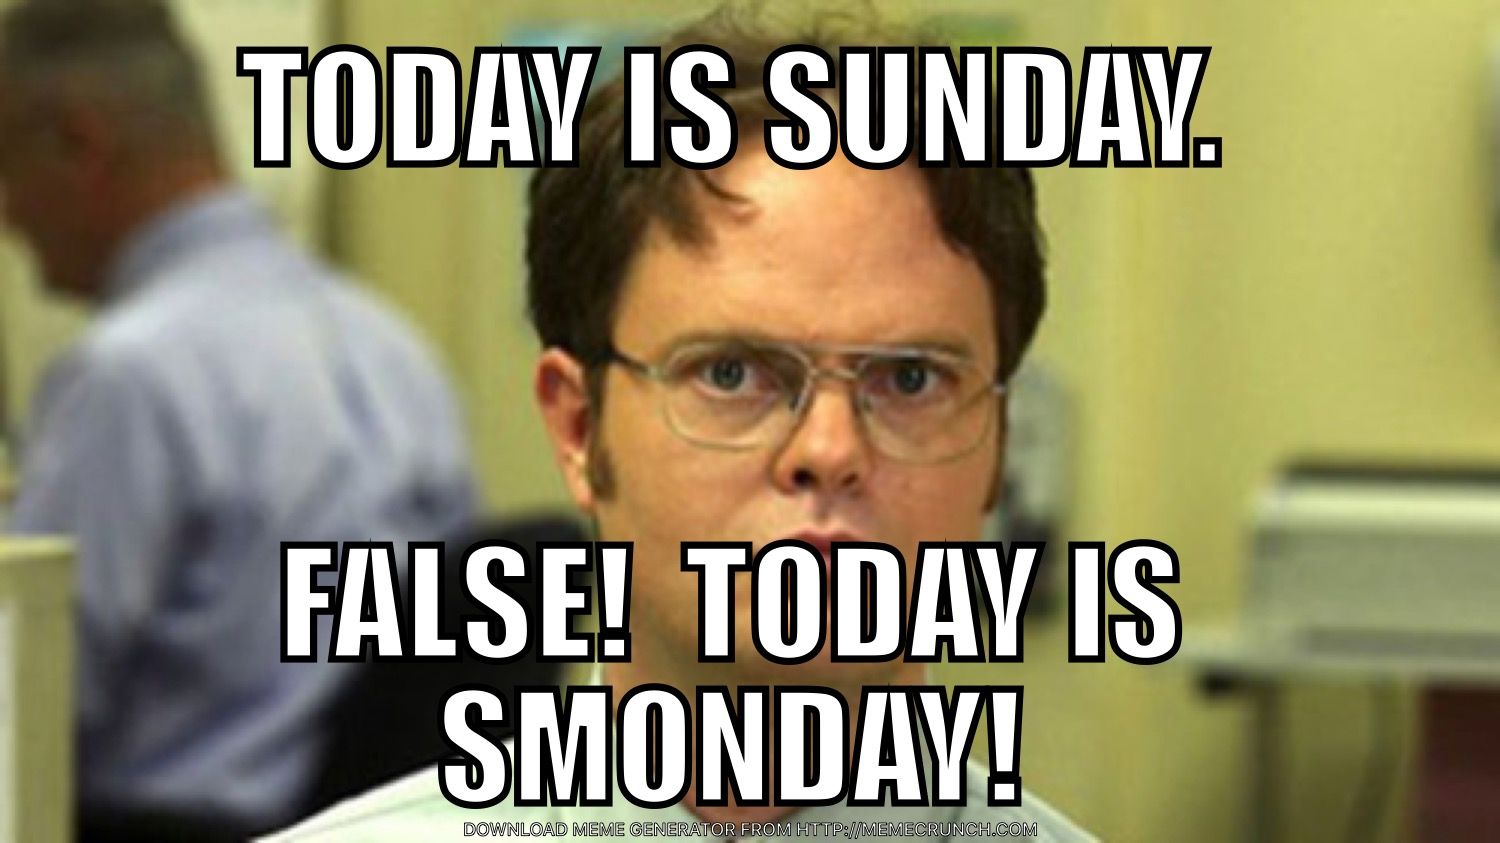 funny sunday memes - Today Is Sunday. False! Today Is Smonday! dwight the office